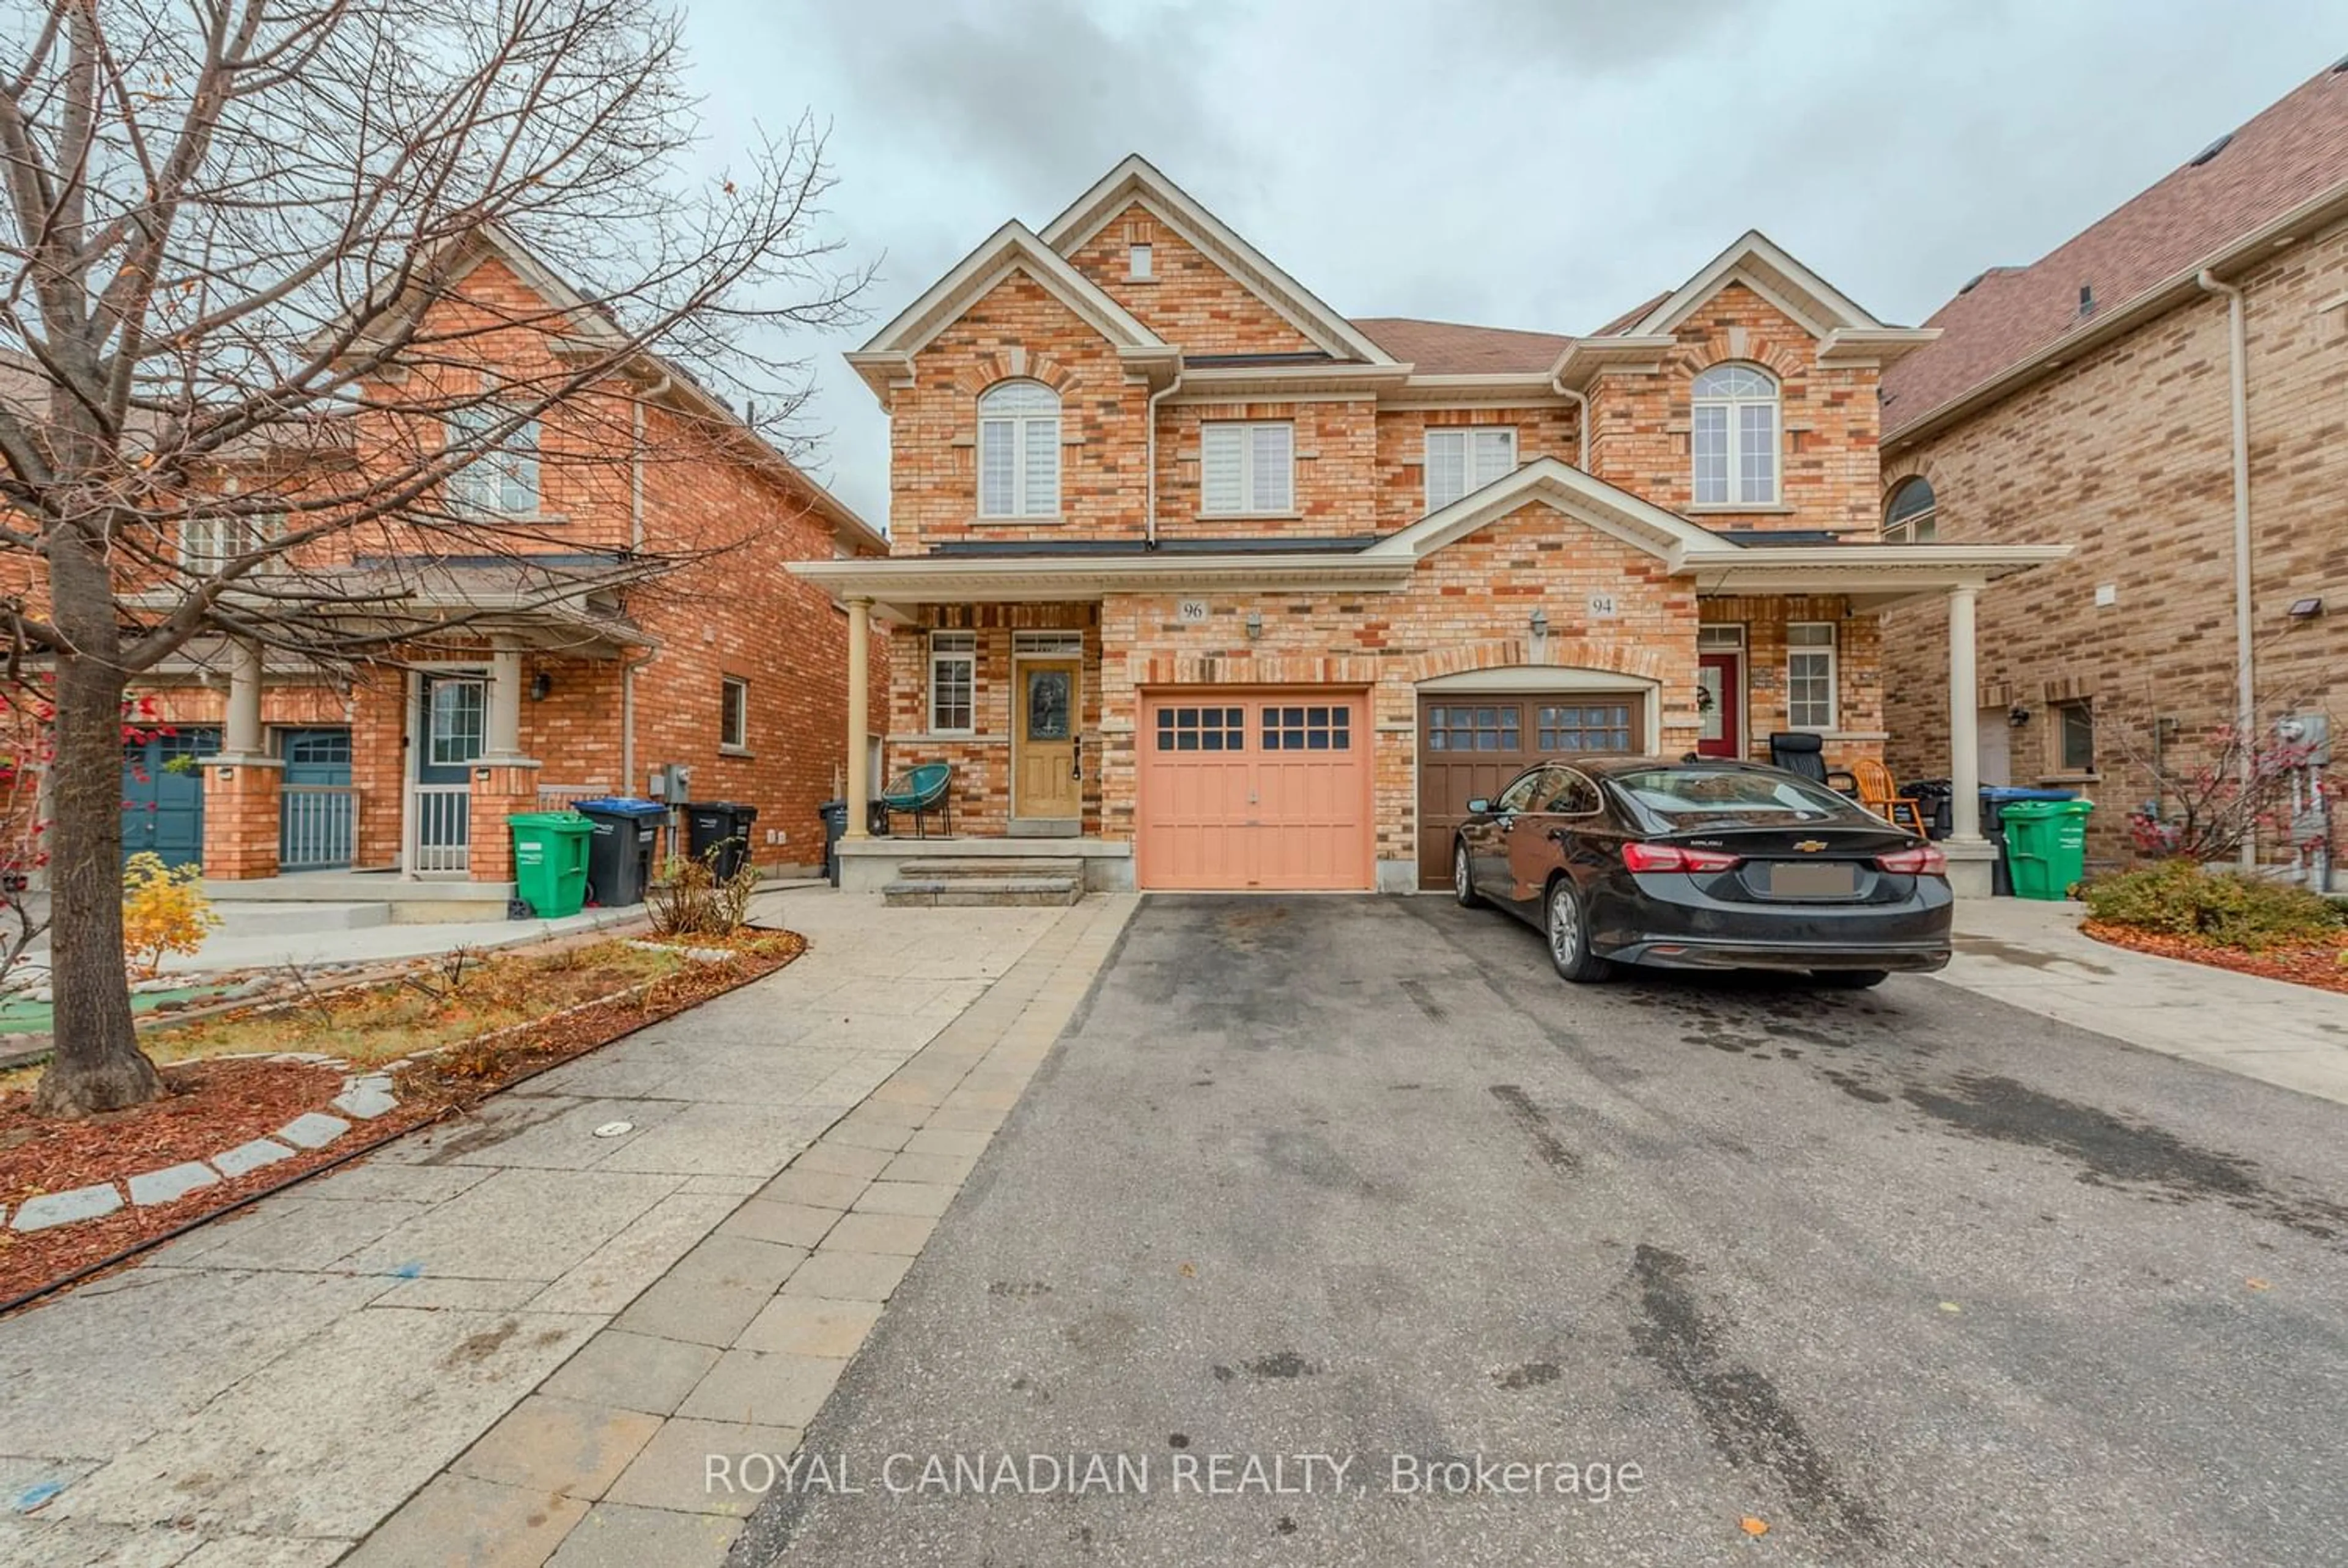 A pic from exterior of the house or condo for 96 Clearfield Dr, Brampton Ontario L6P 3J4